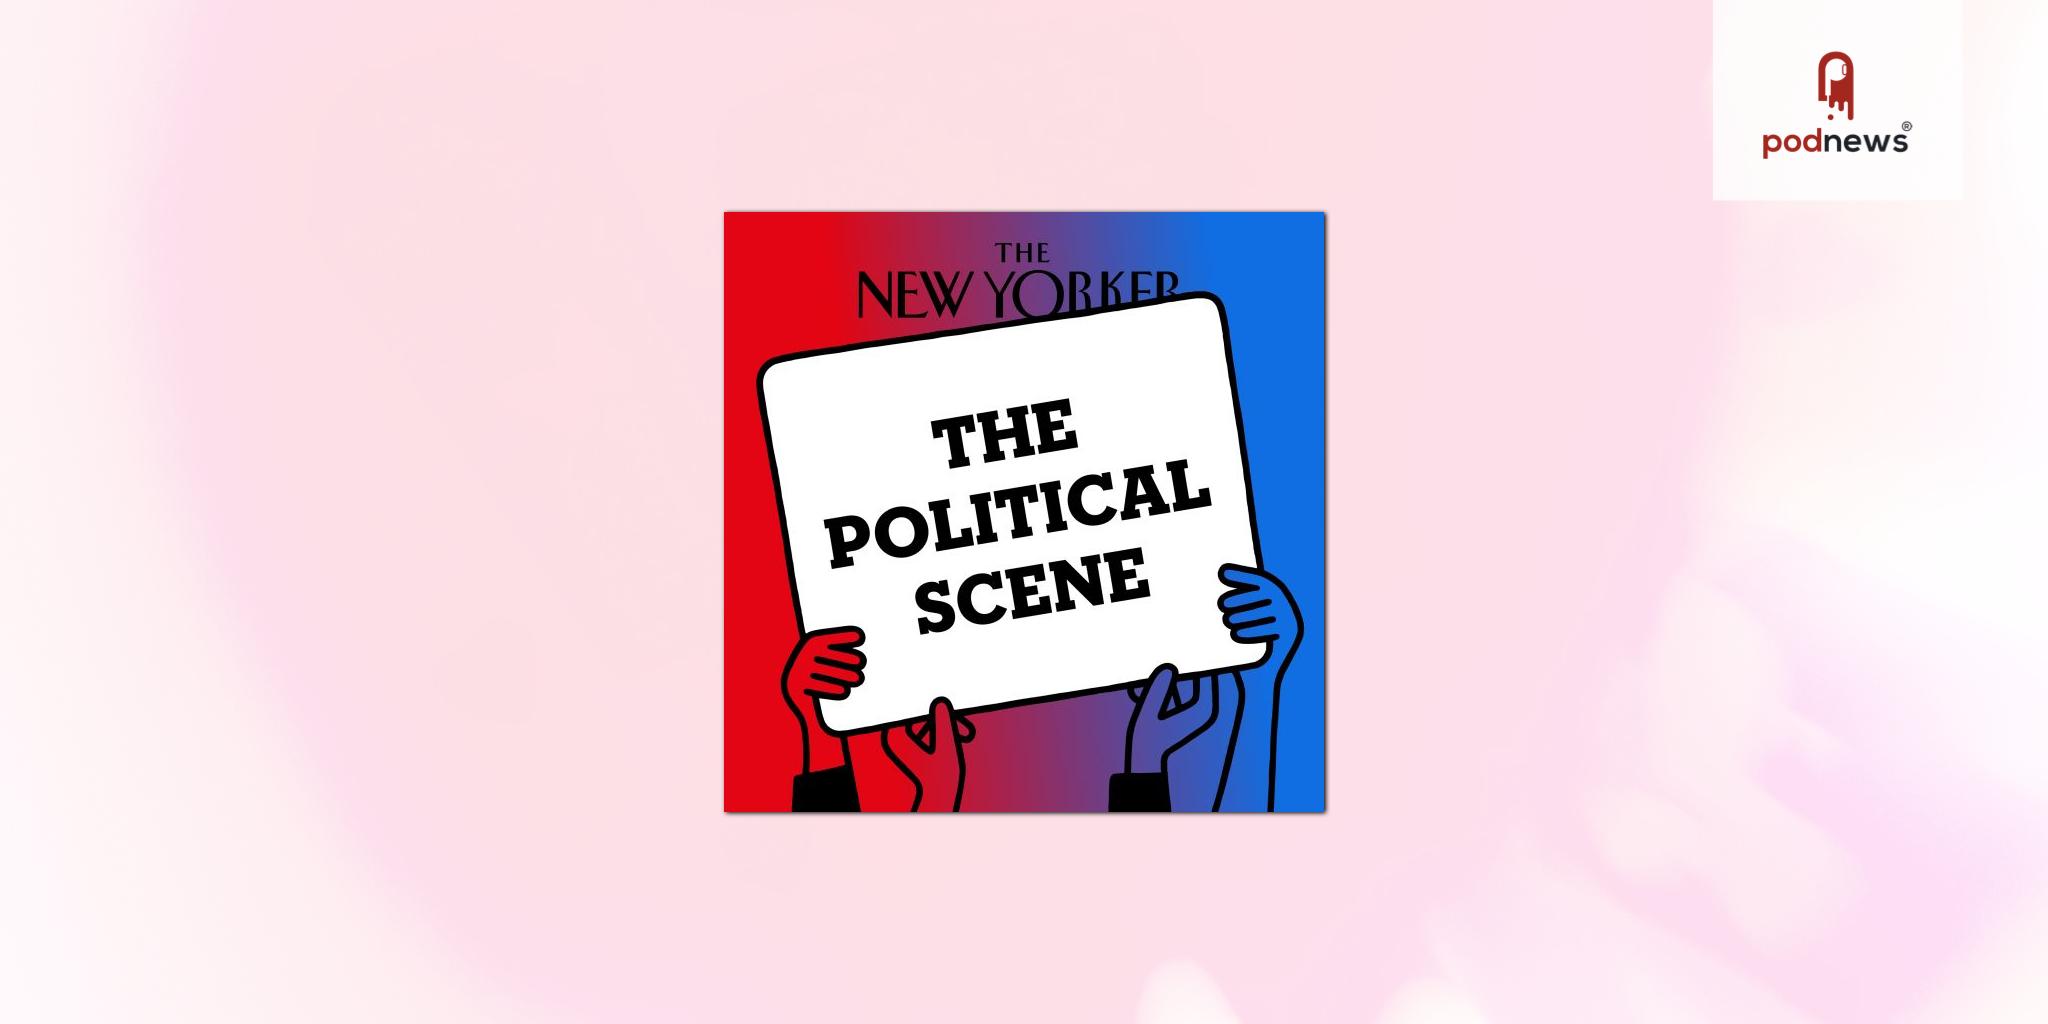 The New Yorker Relaunches Its Flagship Politics Podcast, “The Political Scene,” With New Programming and Hosts